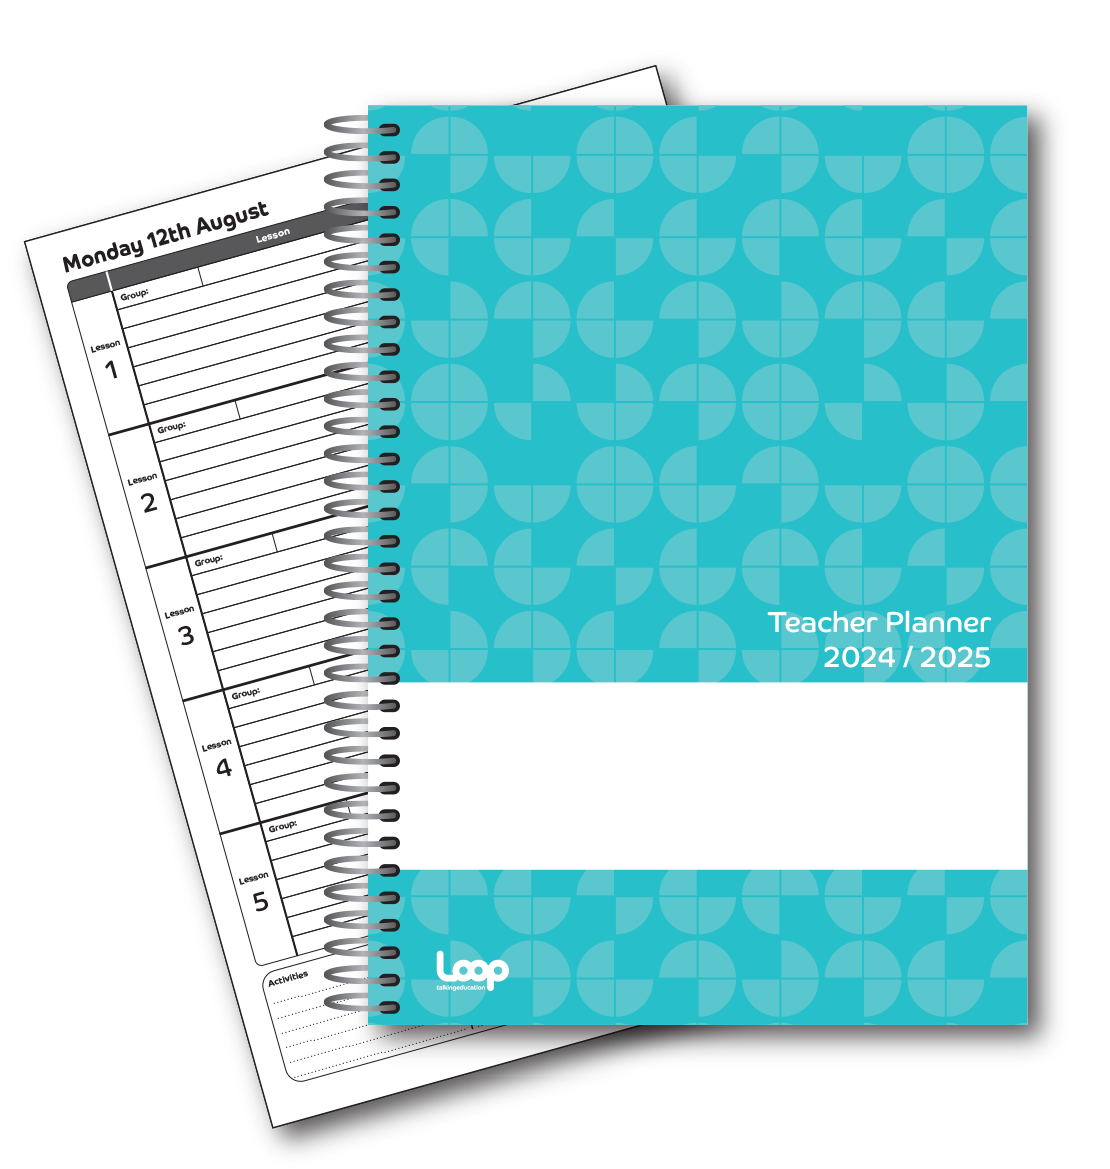 5 Lesson Dated Teacher Planner A4 size